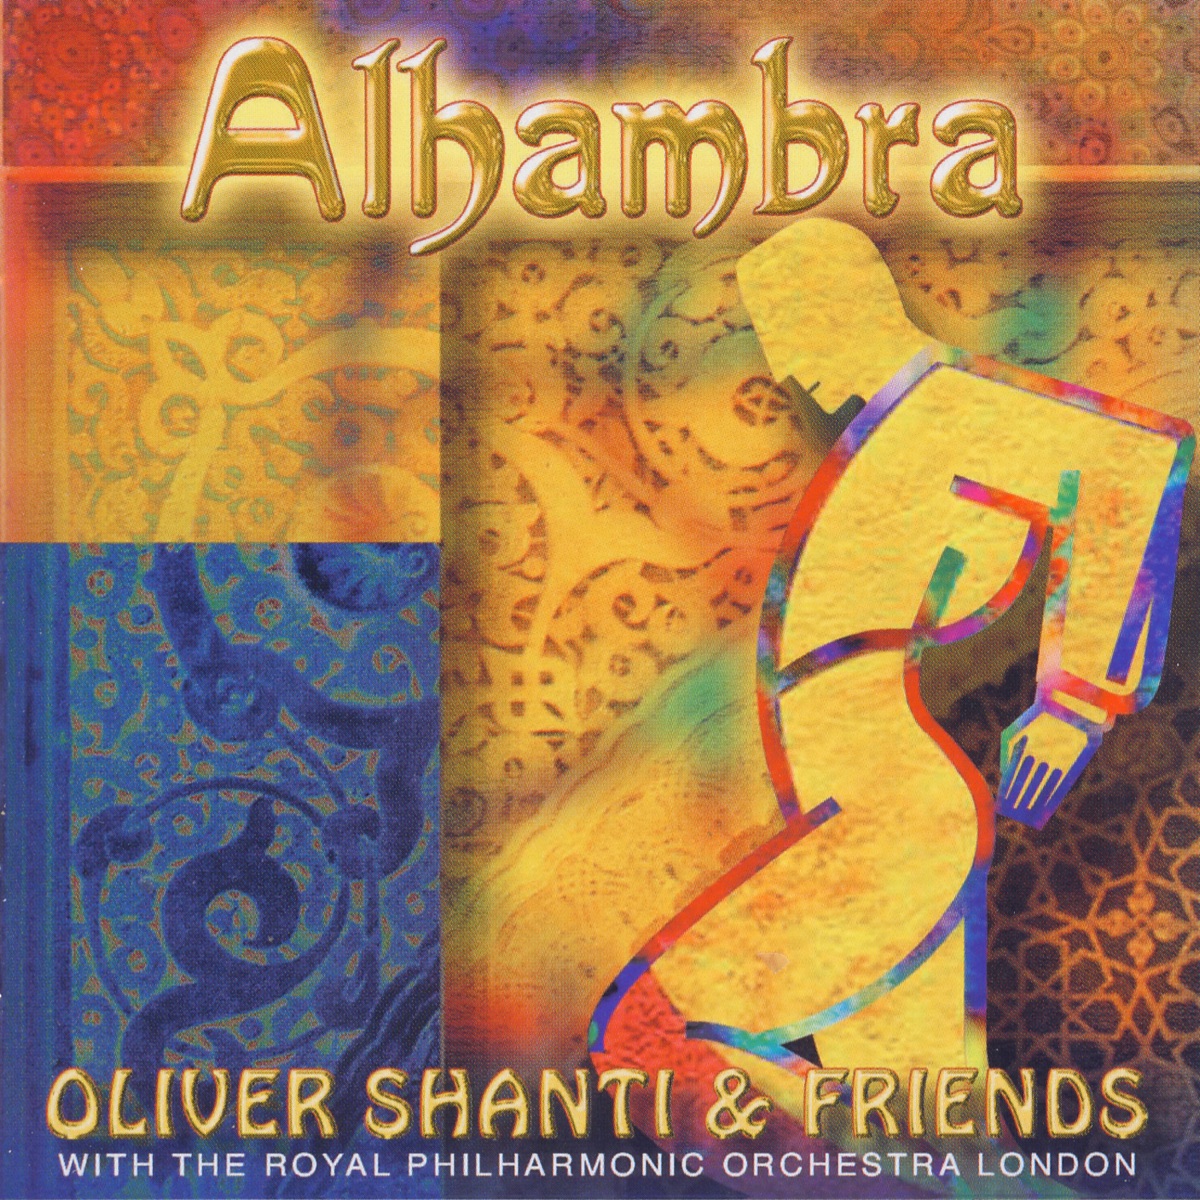 Tai Chi Too by Oliver Shanti & Friends on Apple Music